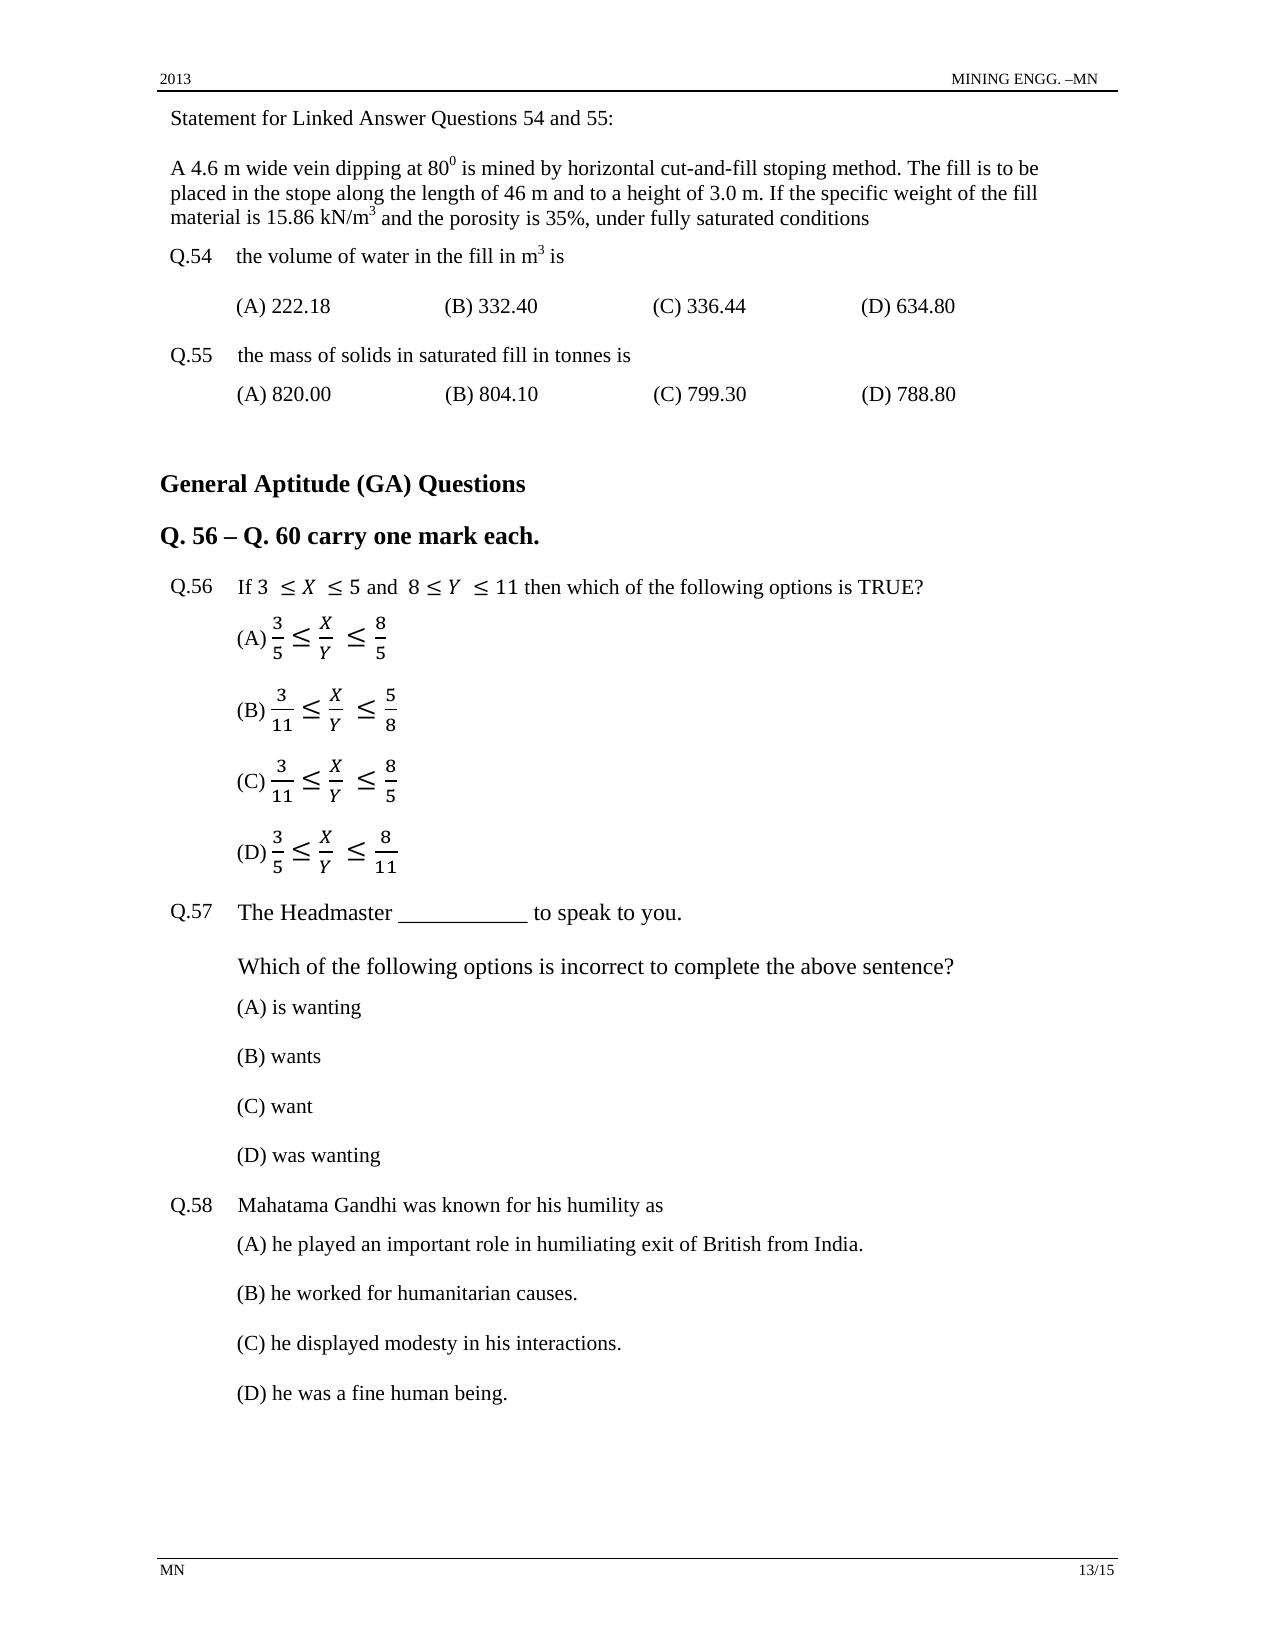 GATE 2013 Mining Engineering (MN) Question Paper with Answer Key - Page 13